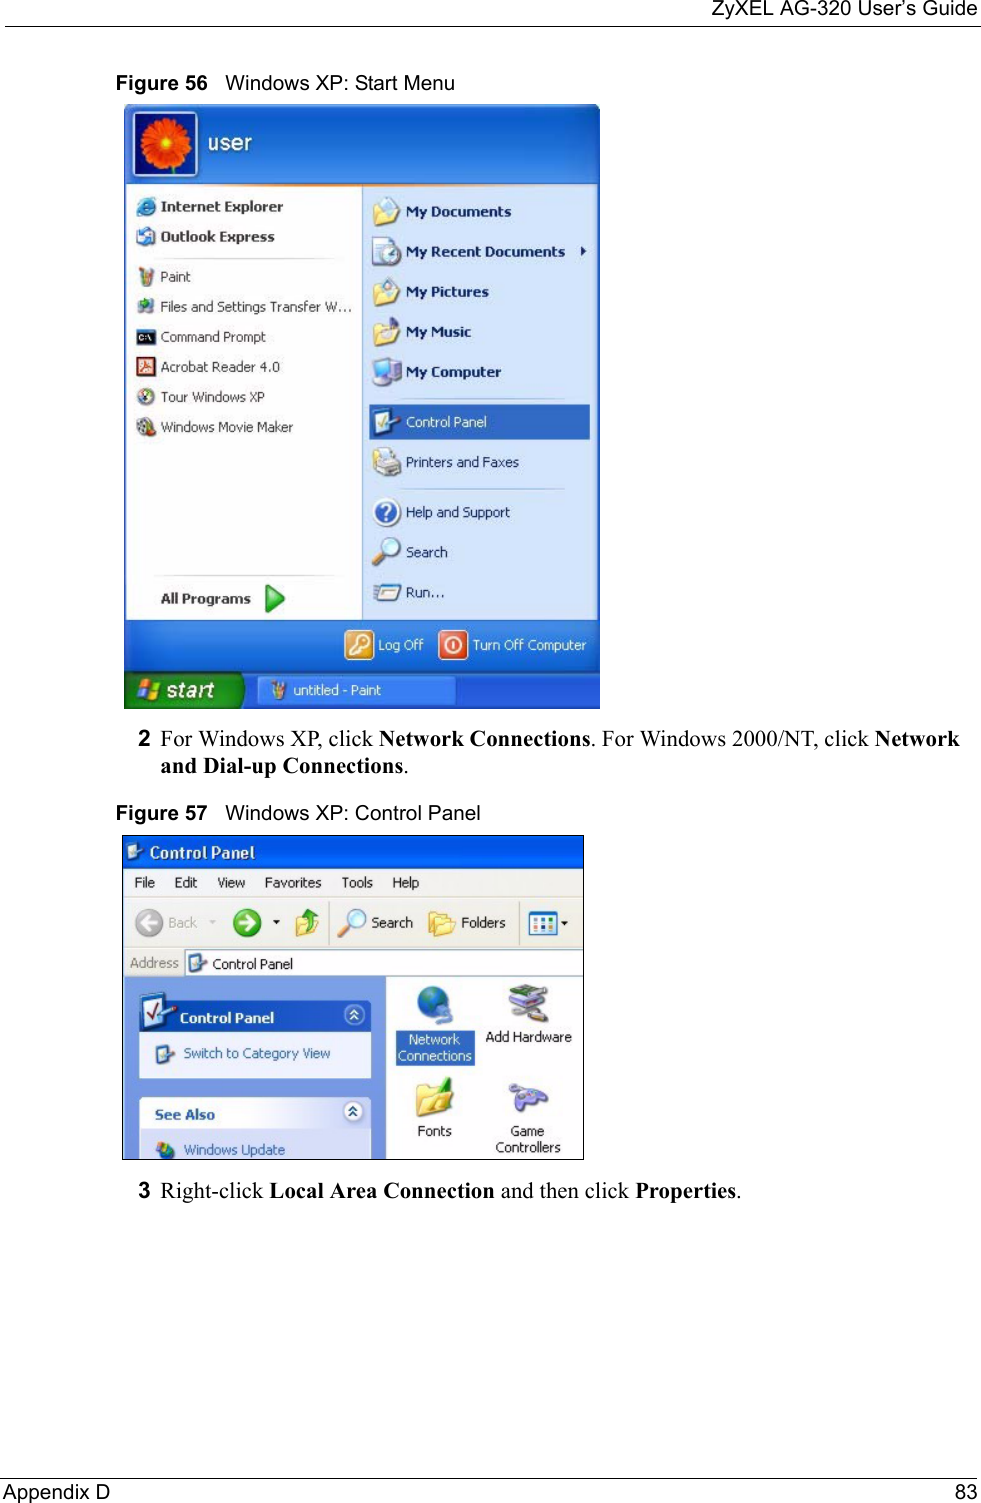 ZyXEL AG-320 User’s GuideAppendix D 83Figure 56   Windows XP: Start Menu2For Windows XP, click Network Connections. For Windows 2000/NT, click Network and Dial-up Connections.Figure 57   Windows XP: Control Panel3Right-click Local Area Connection and then click Properties.